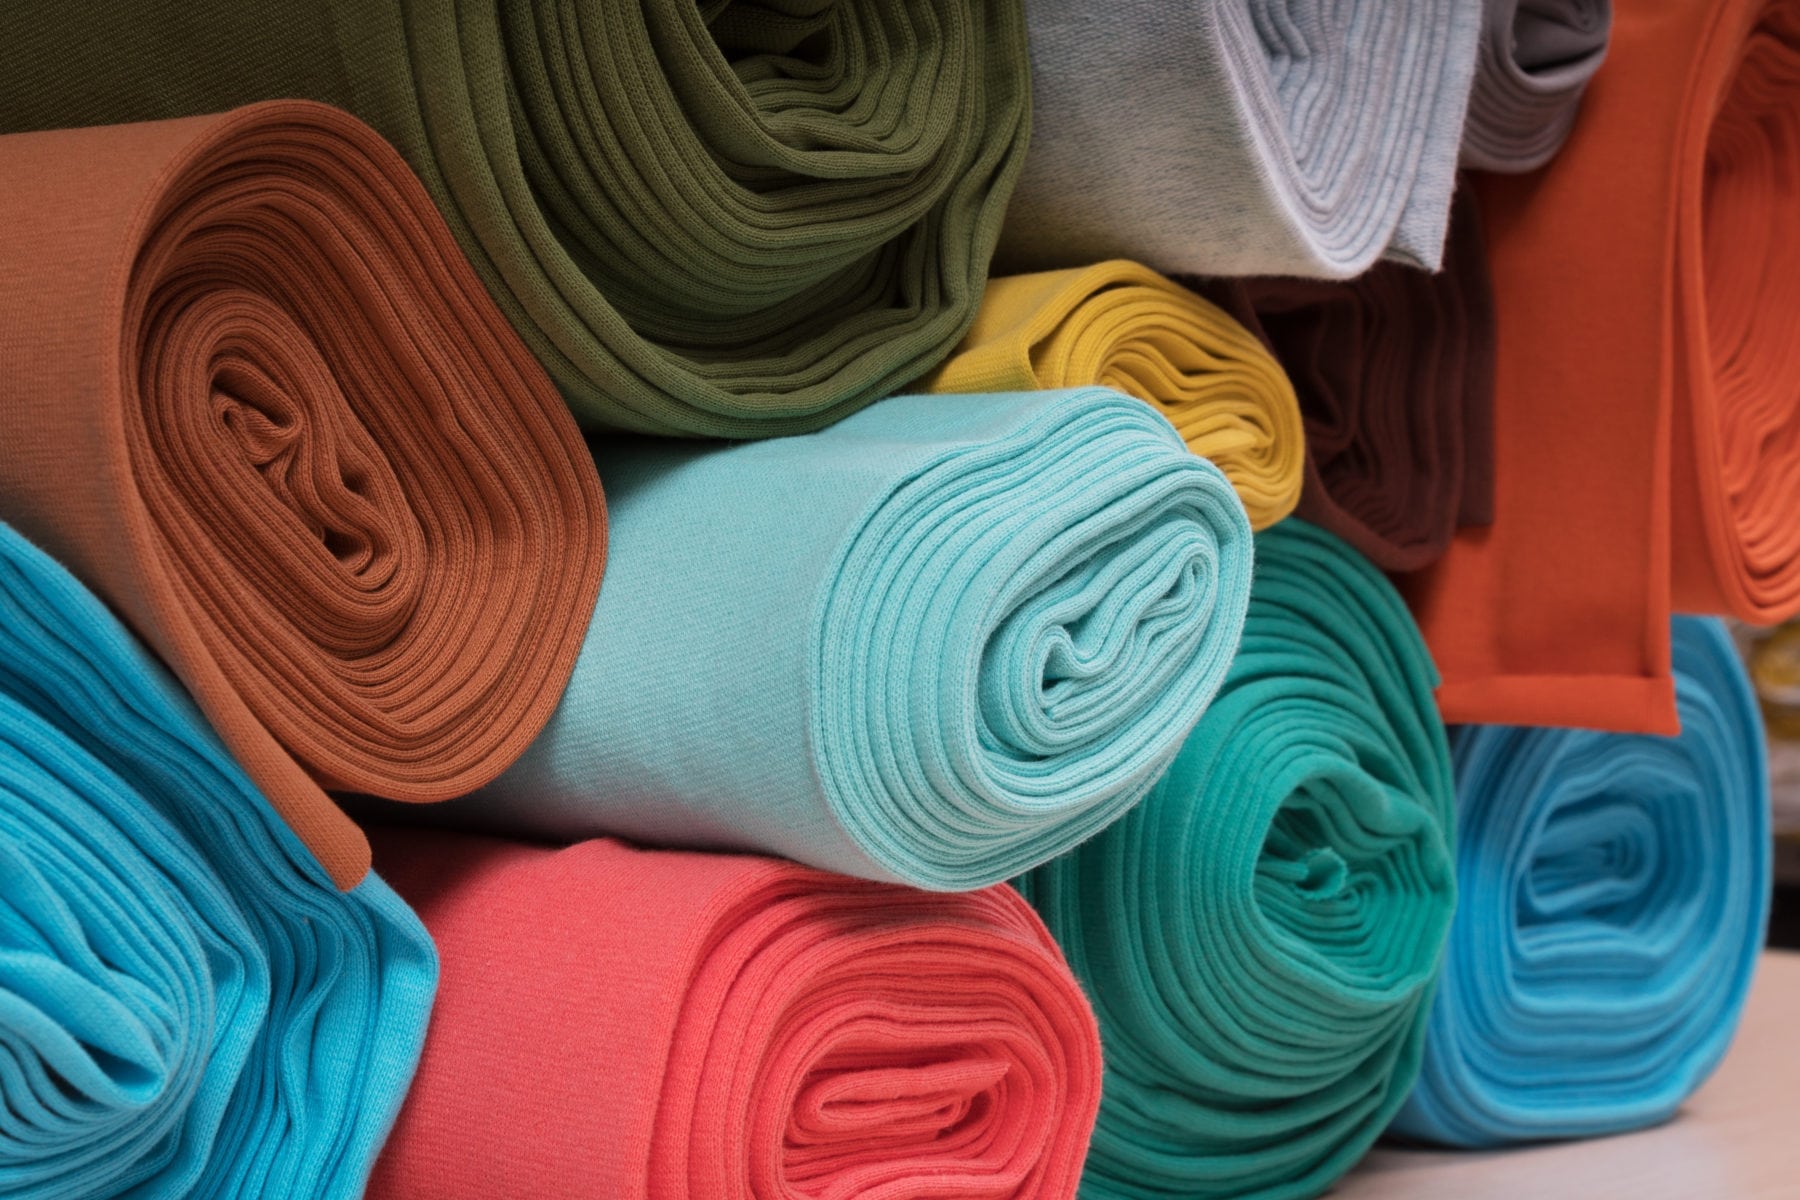 Fabric Stock Services: A rising trend but not a replacement